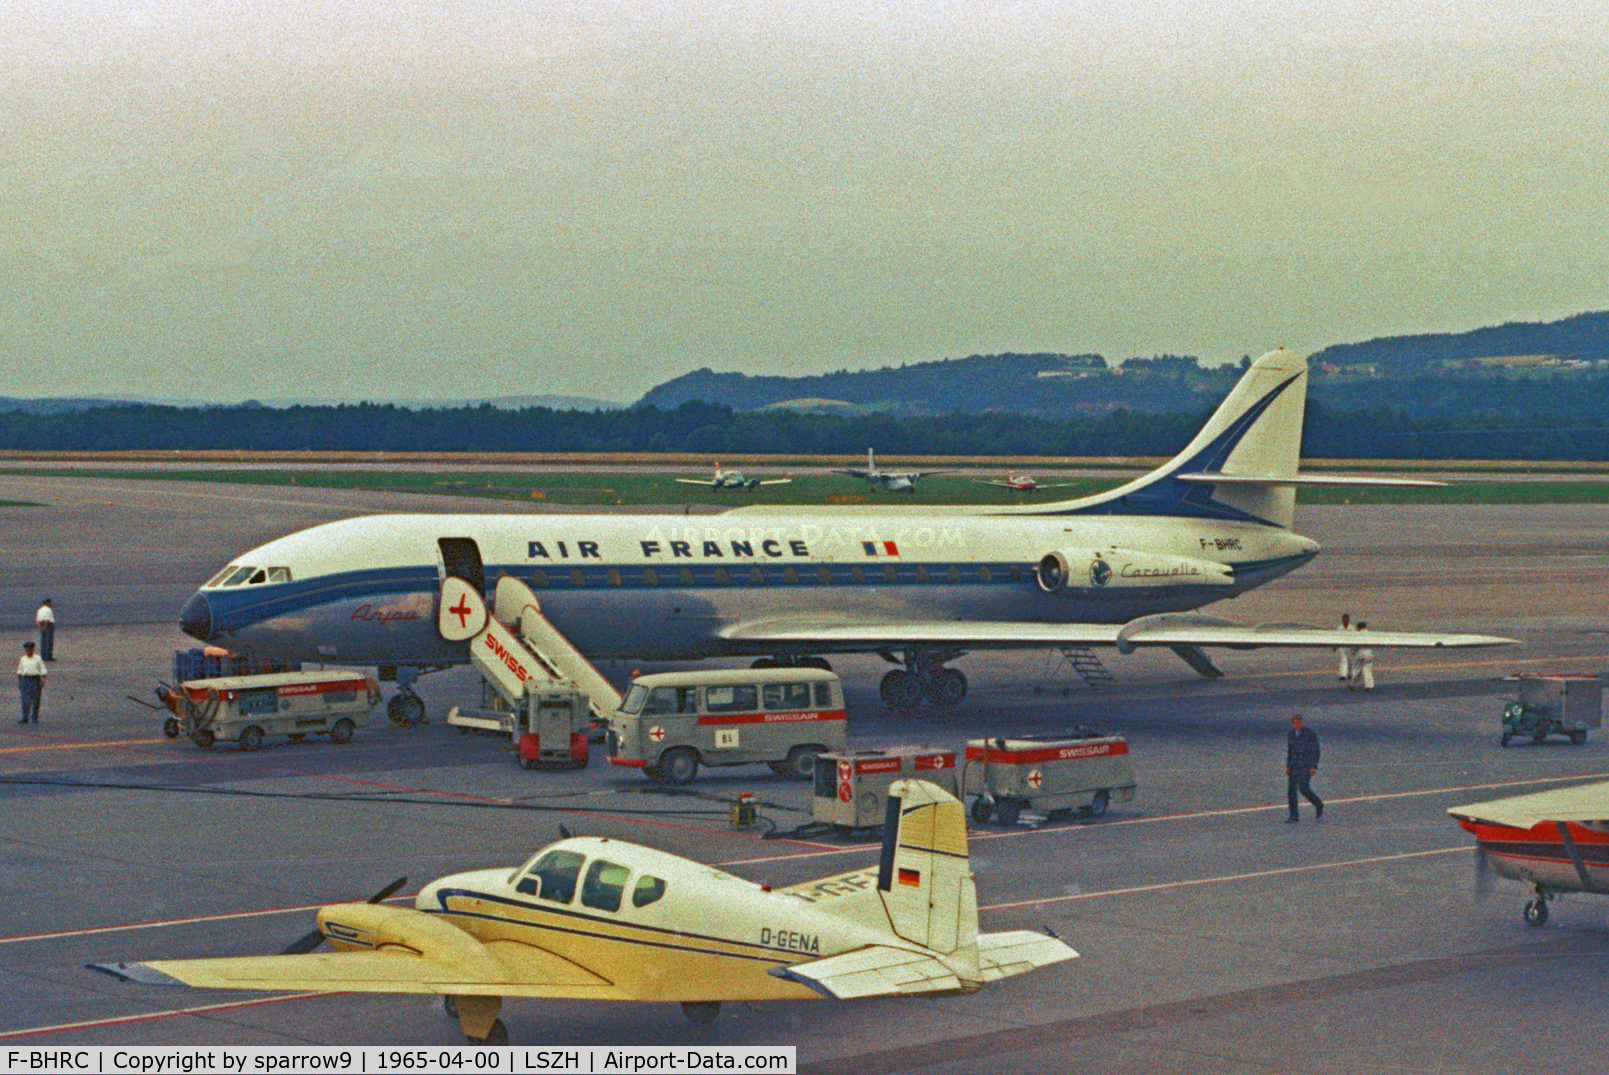 F-BHRC, 1959 Sud Aviation SE-210 Caravelle III C/N 5, At Zurich-Kloten airport on a cloudy day. Scanned from a color-negative.